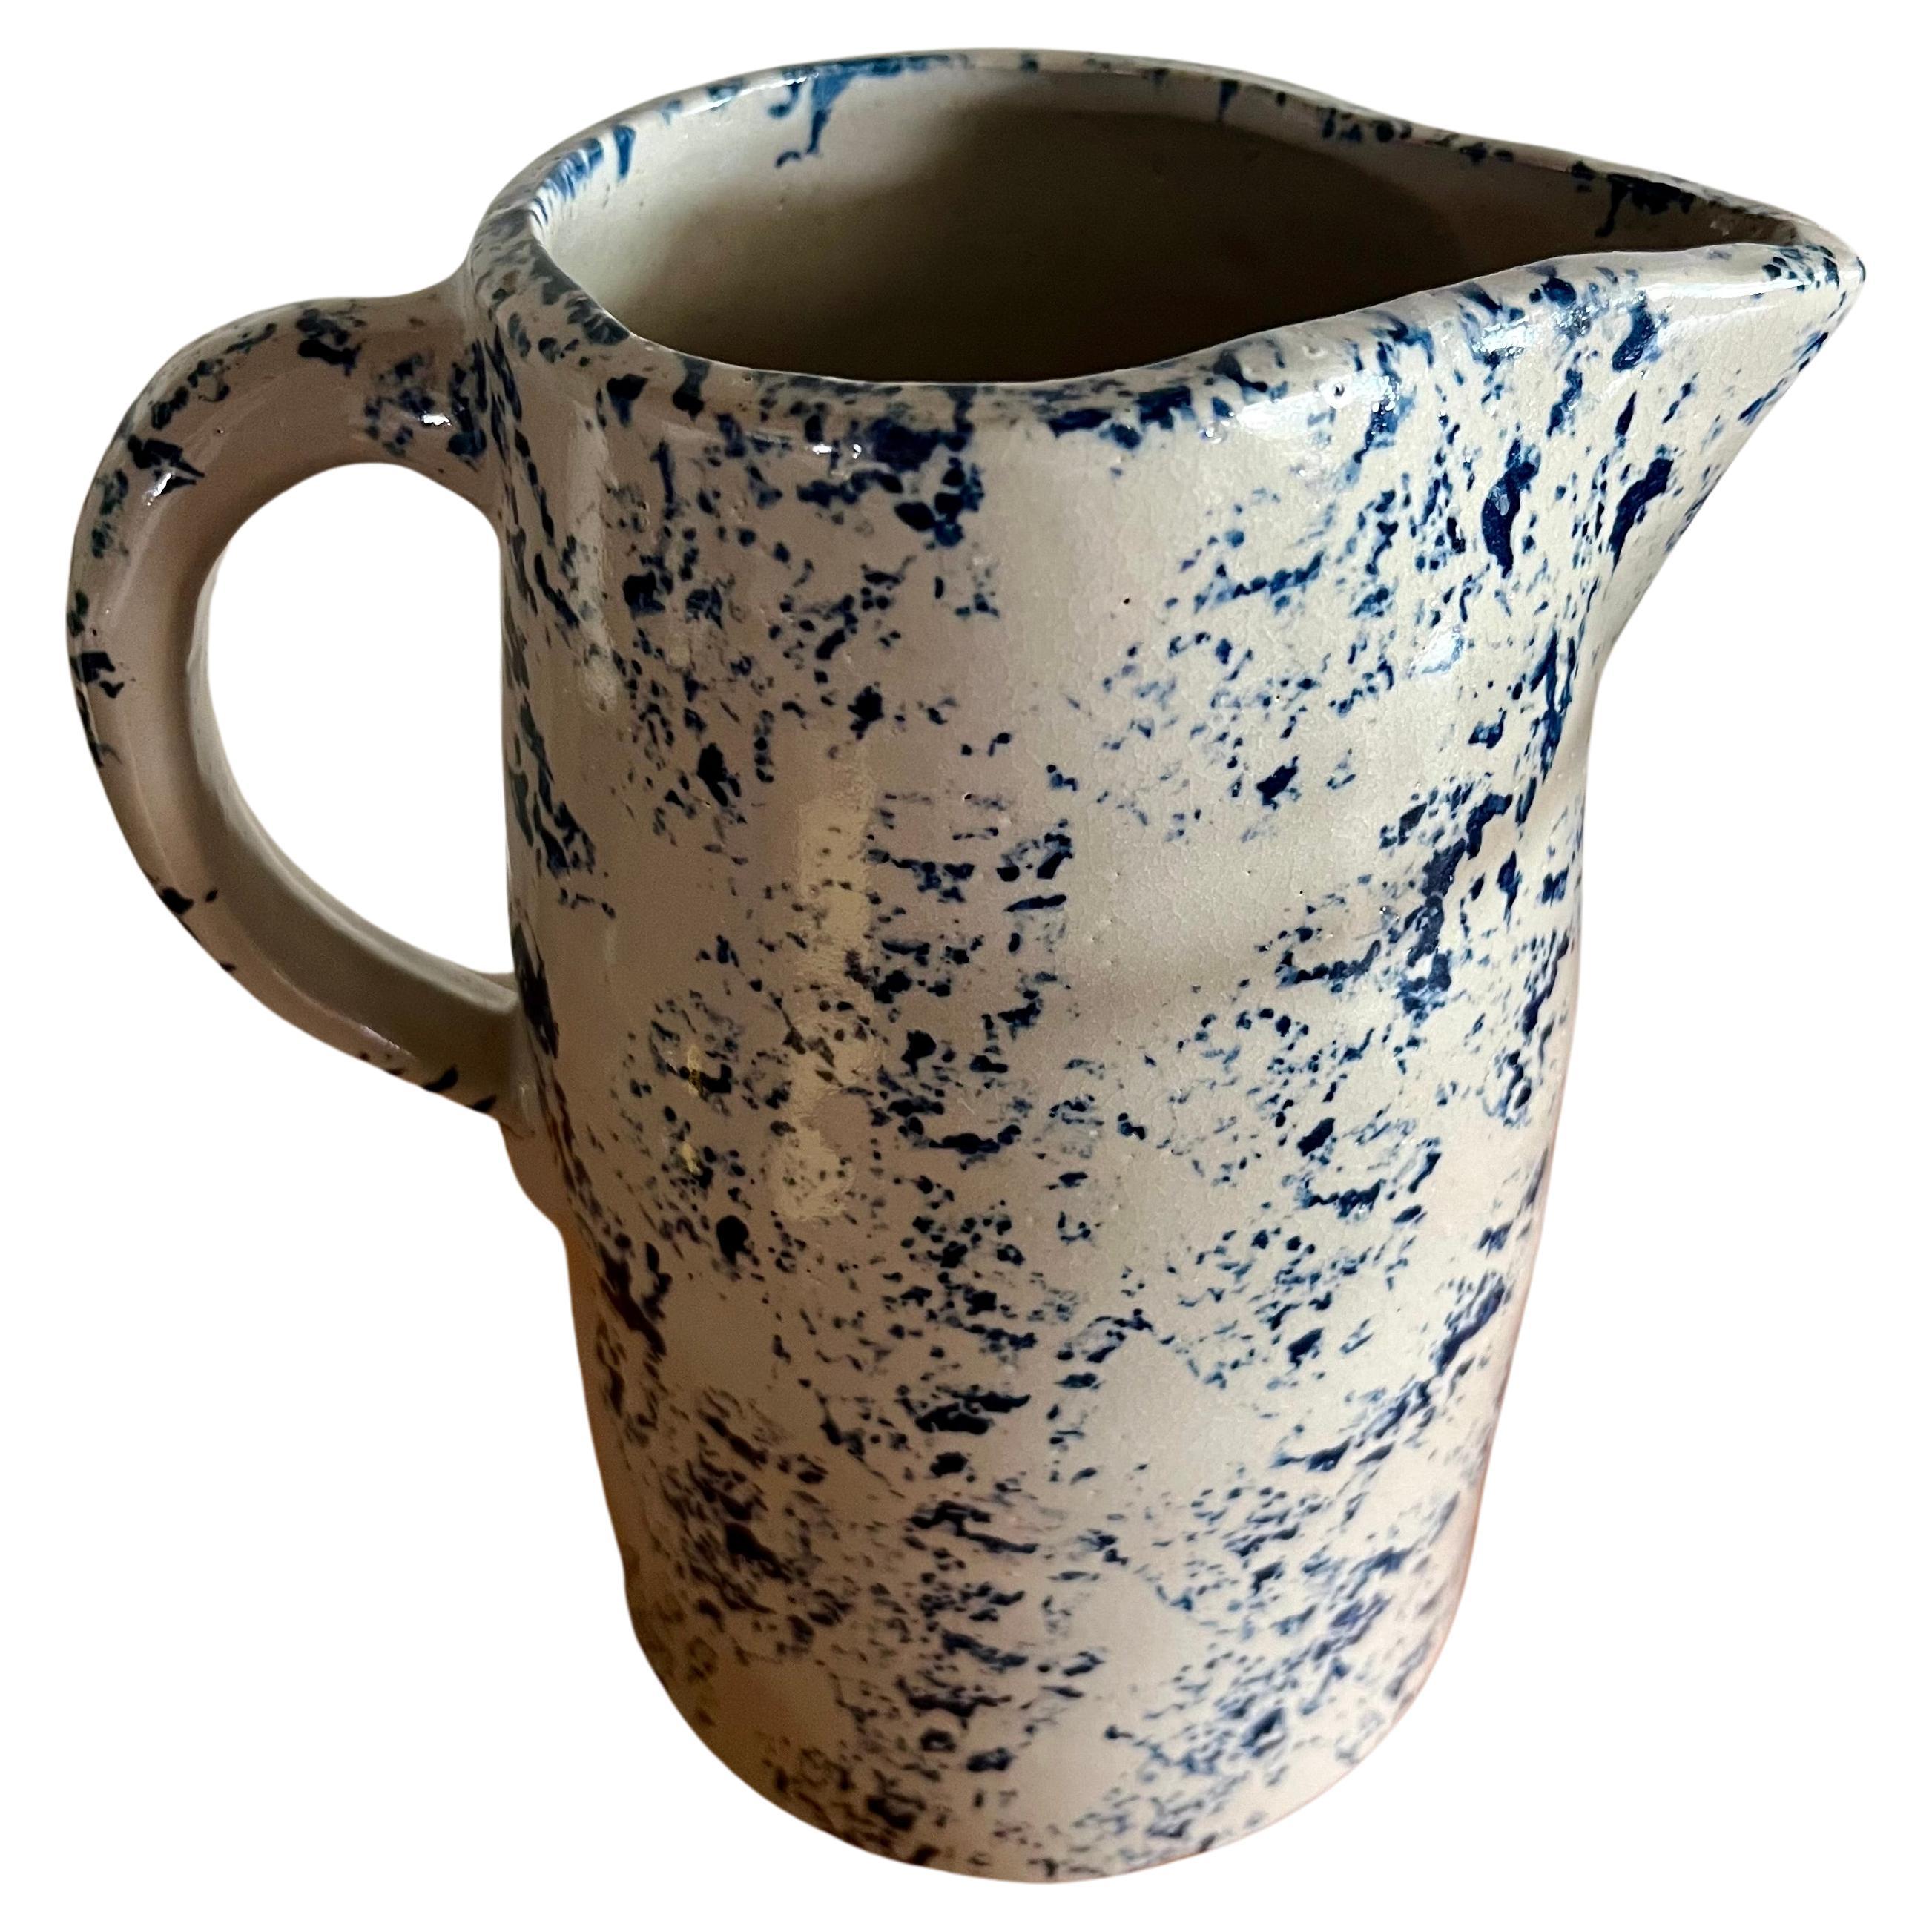 This fantastic sponge pottery pitcher is in fine-as found-condition. It has a spotted design sponge pattern. No chips or cracks in the ceramic. 
